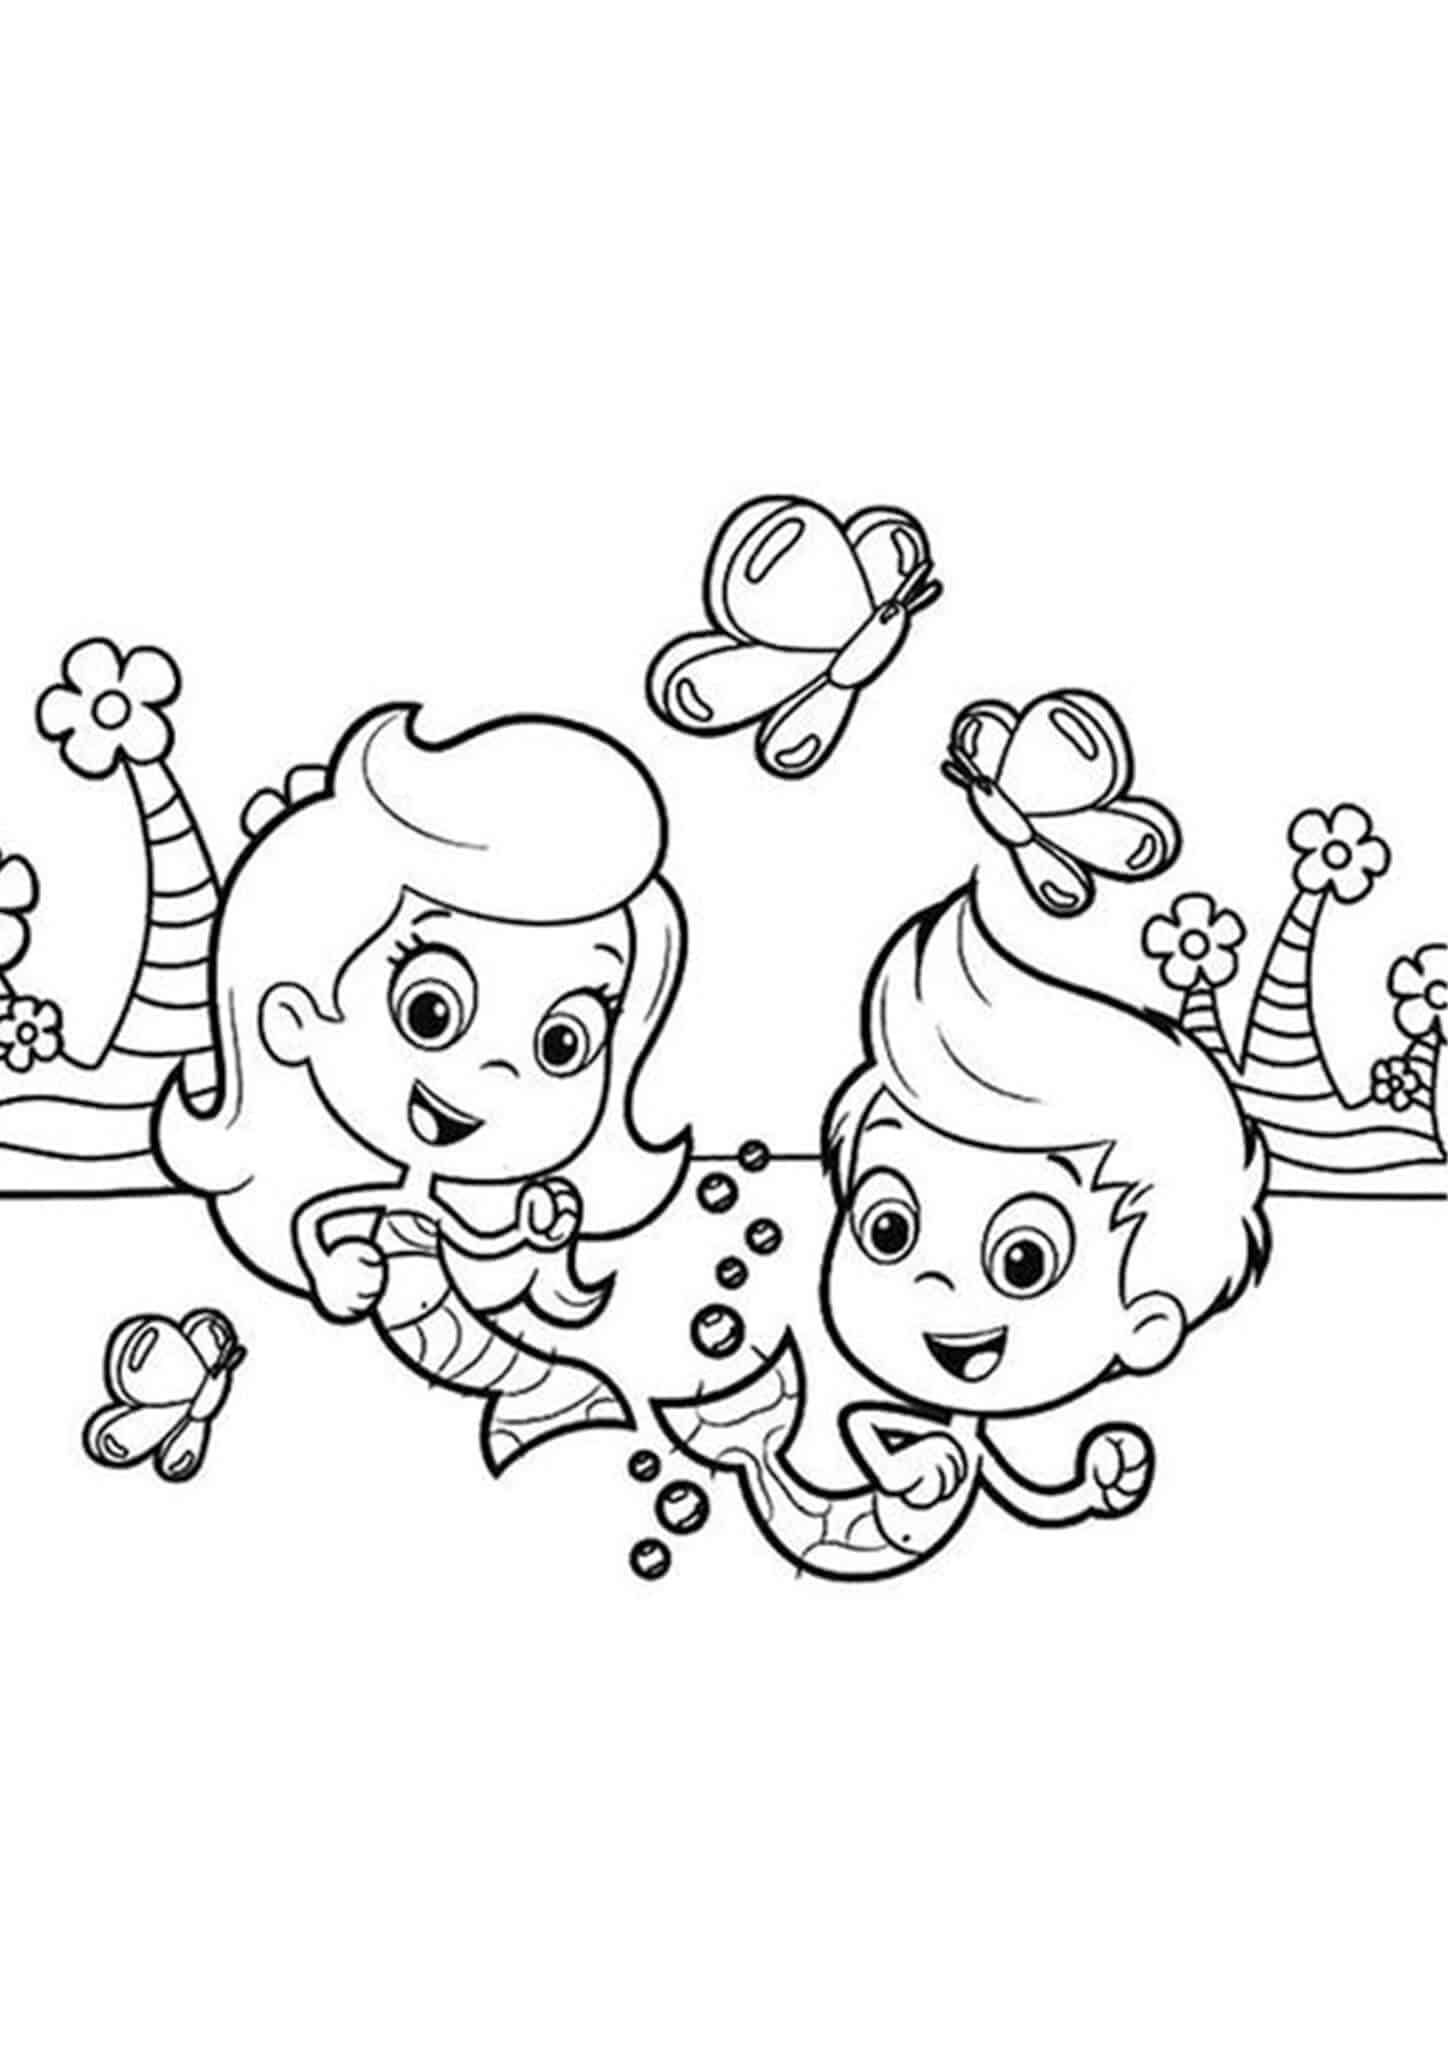 Free easy to print bubble guppies coloring pages